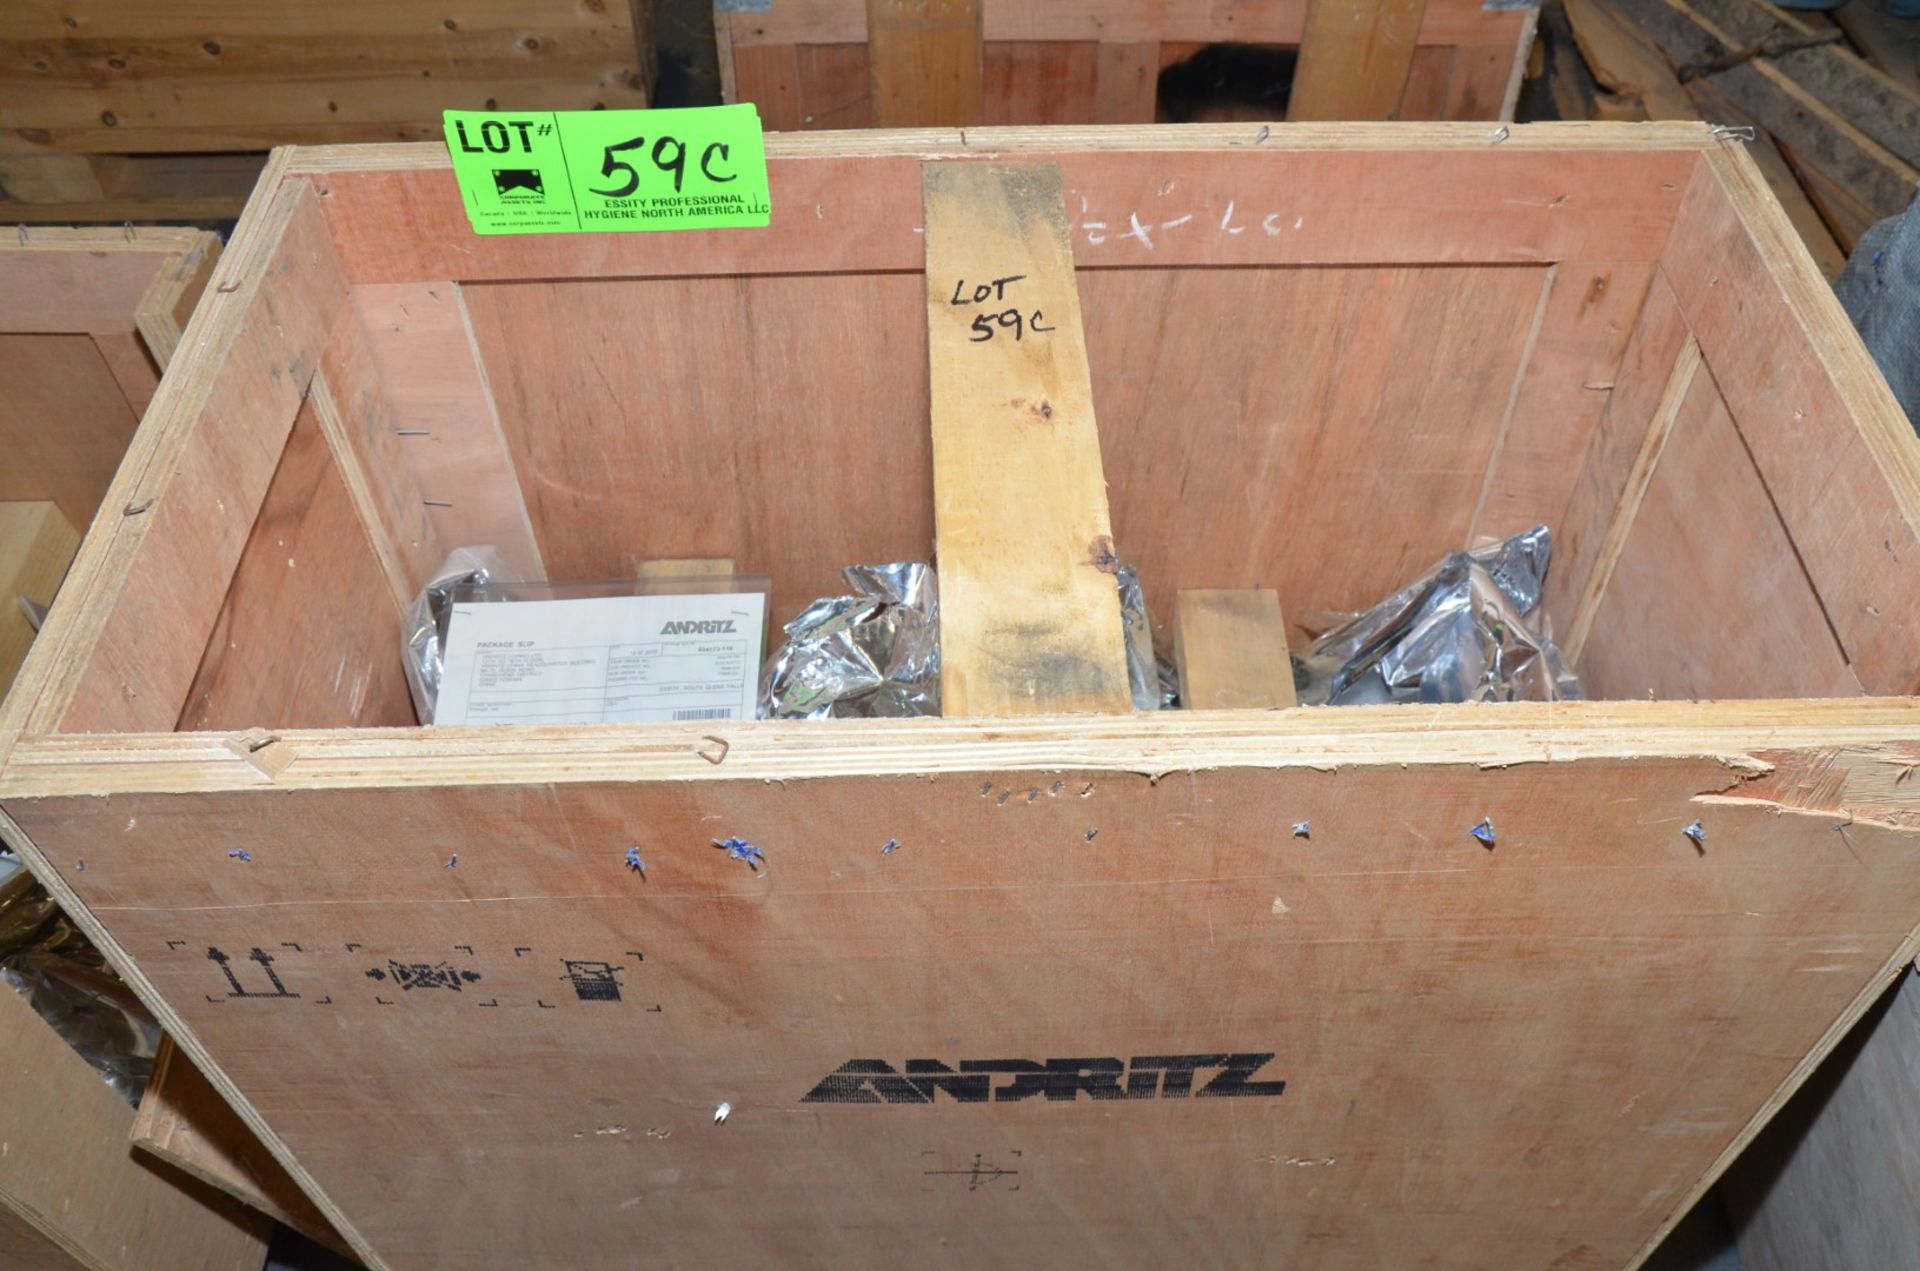 ANDRITZ RAGPULL SPARE PNEUMATIC CYLINDER PISTON [RIGGING FEE FOR LOT #59C - $25 USD PLUS